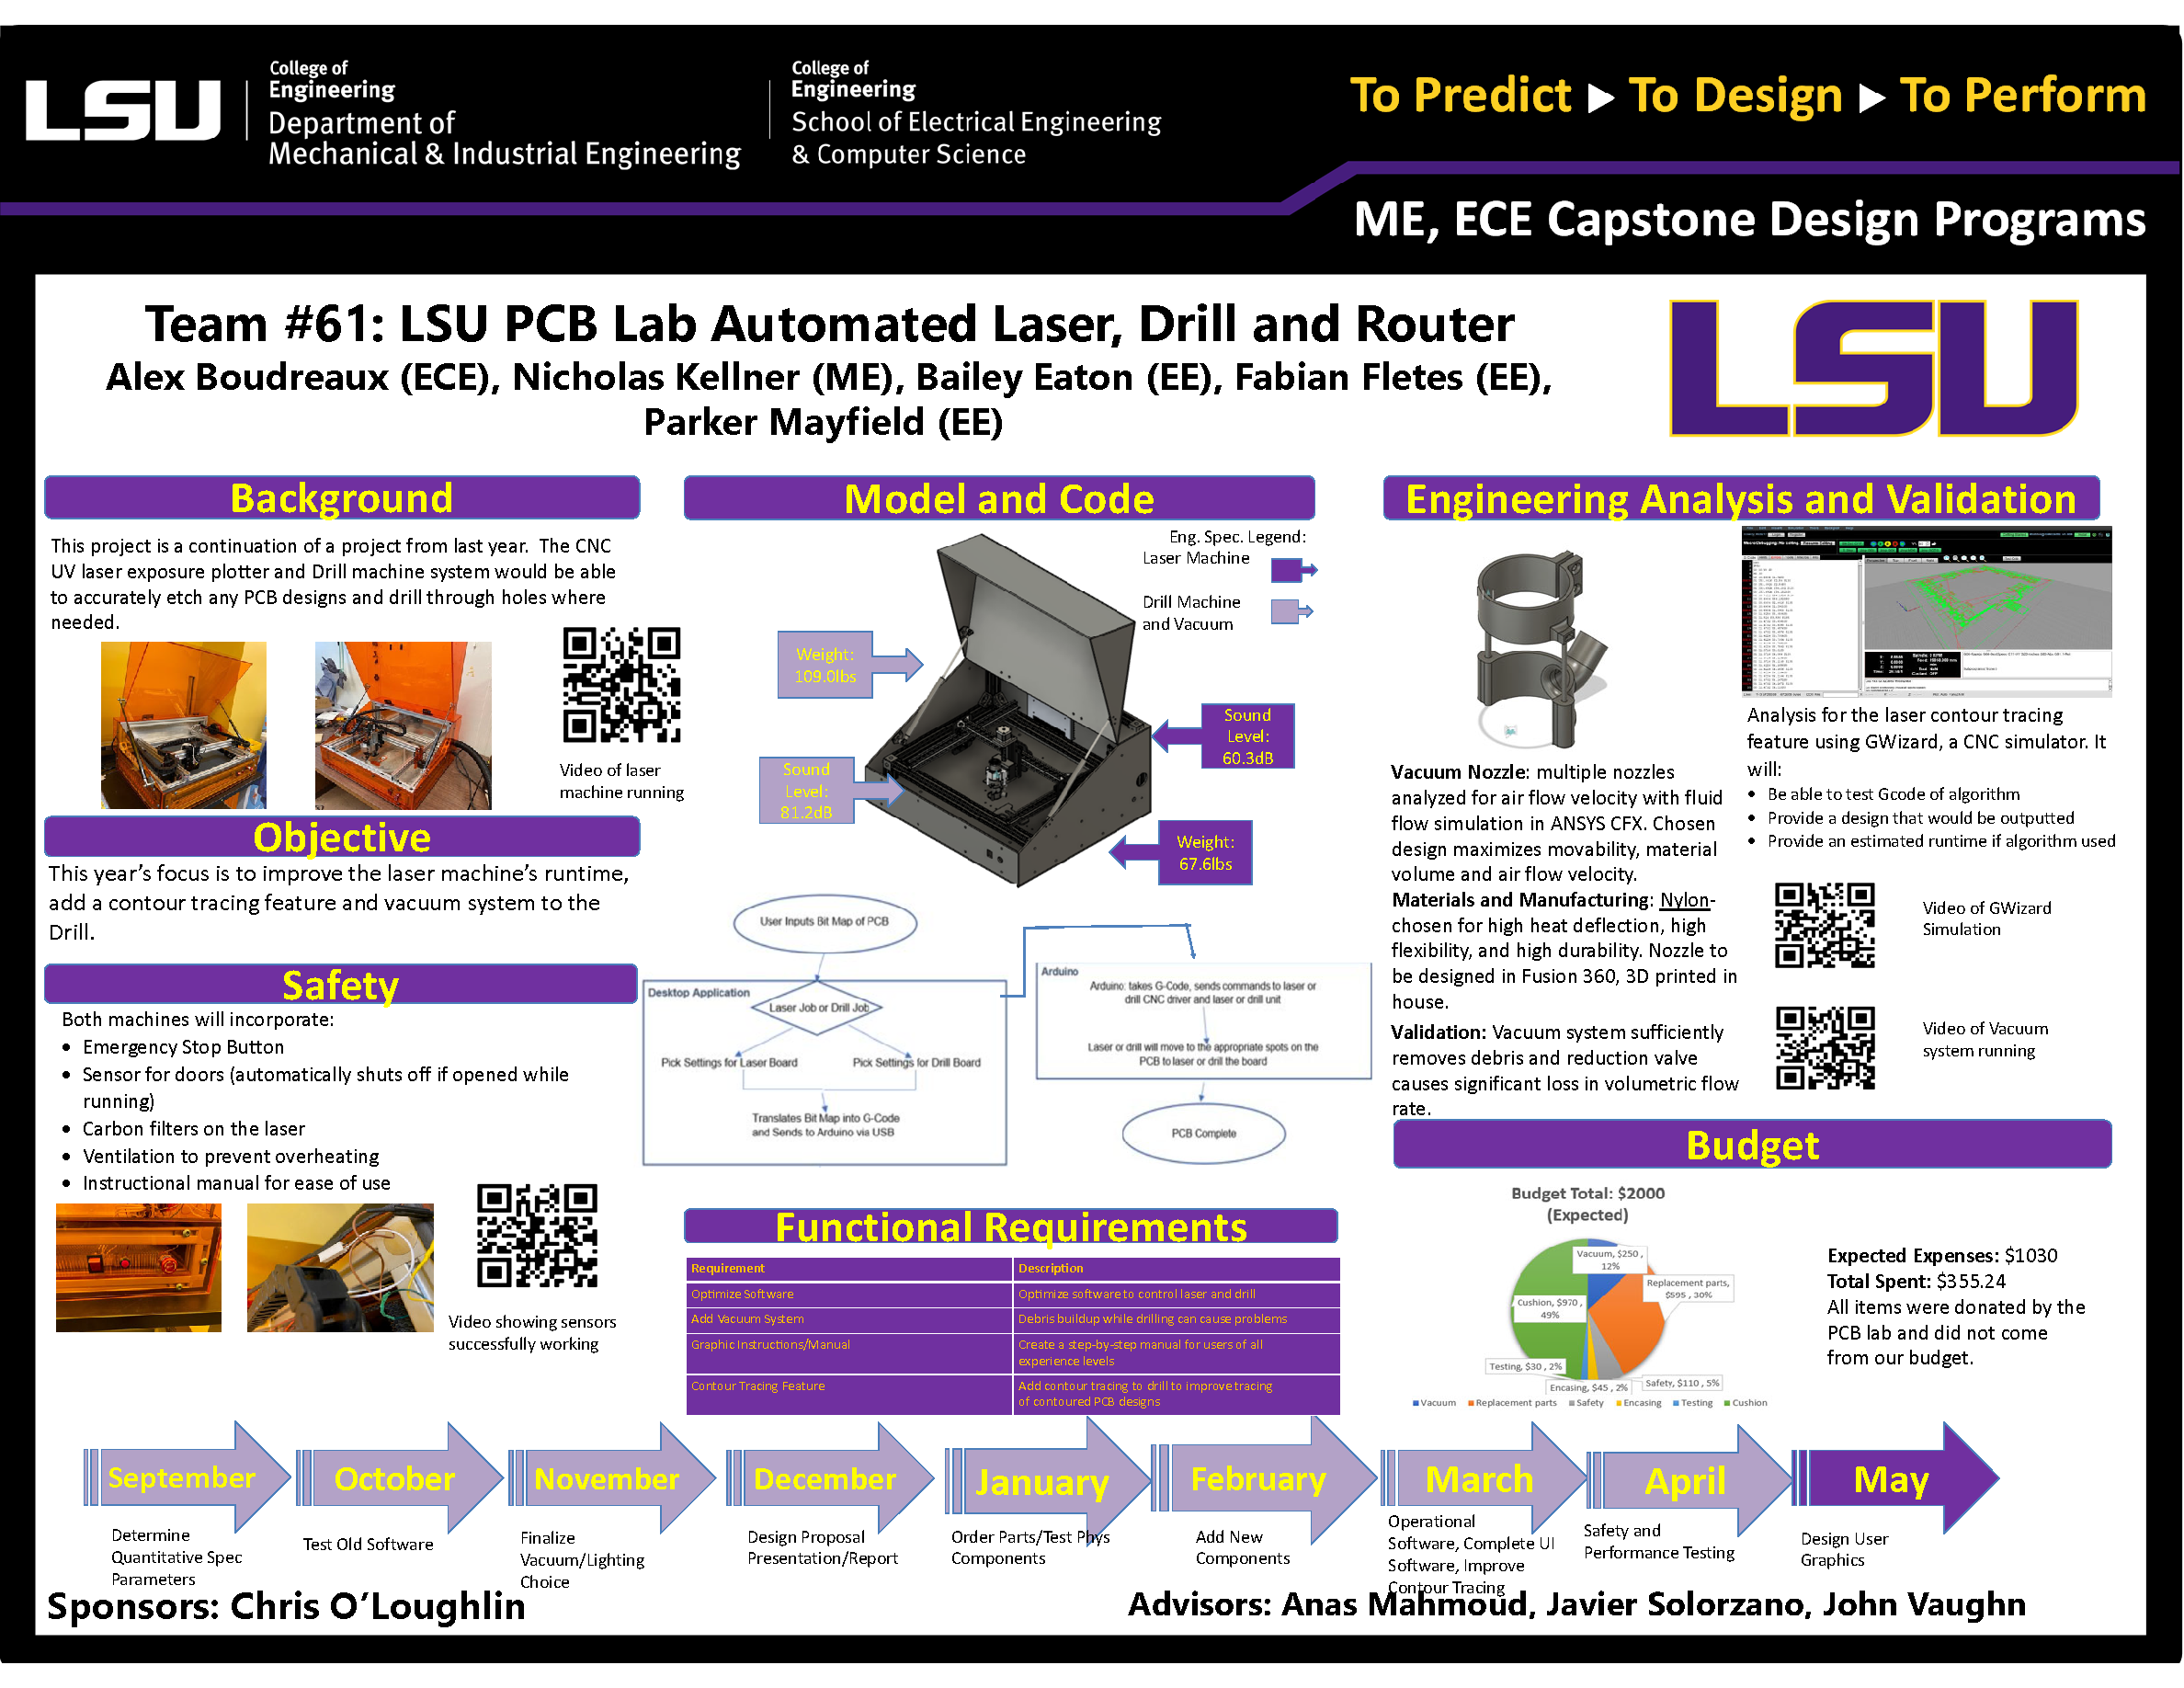 Project 61: LSU PCB Lab Automated Laser, Drill and Router (2021)